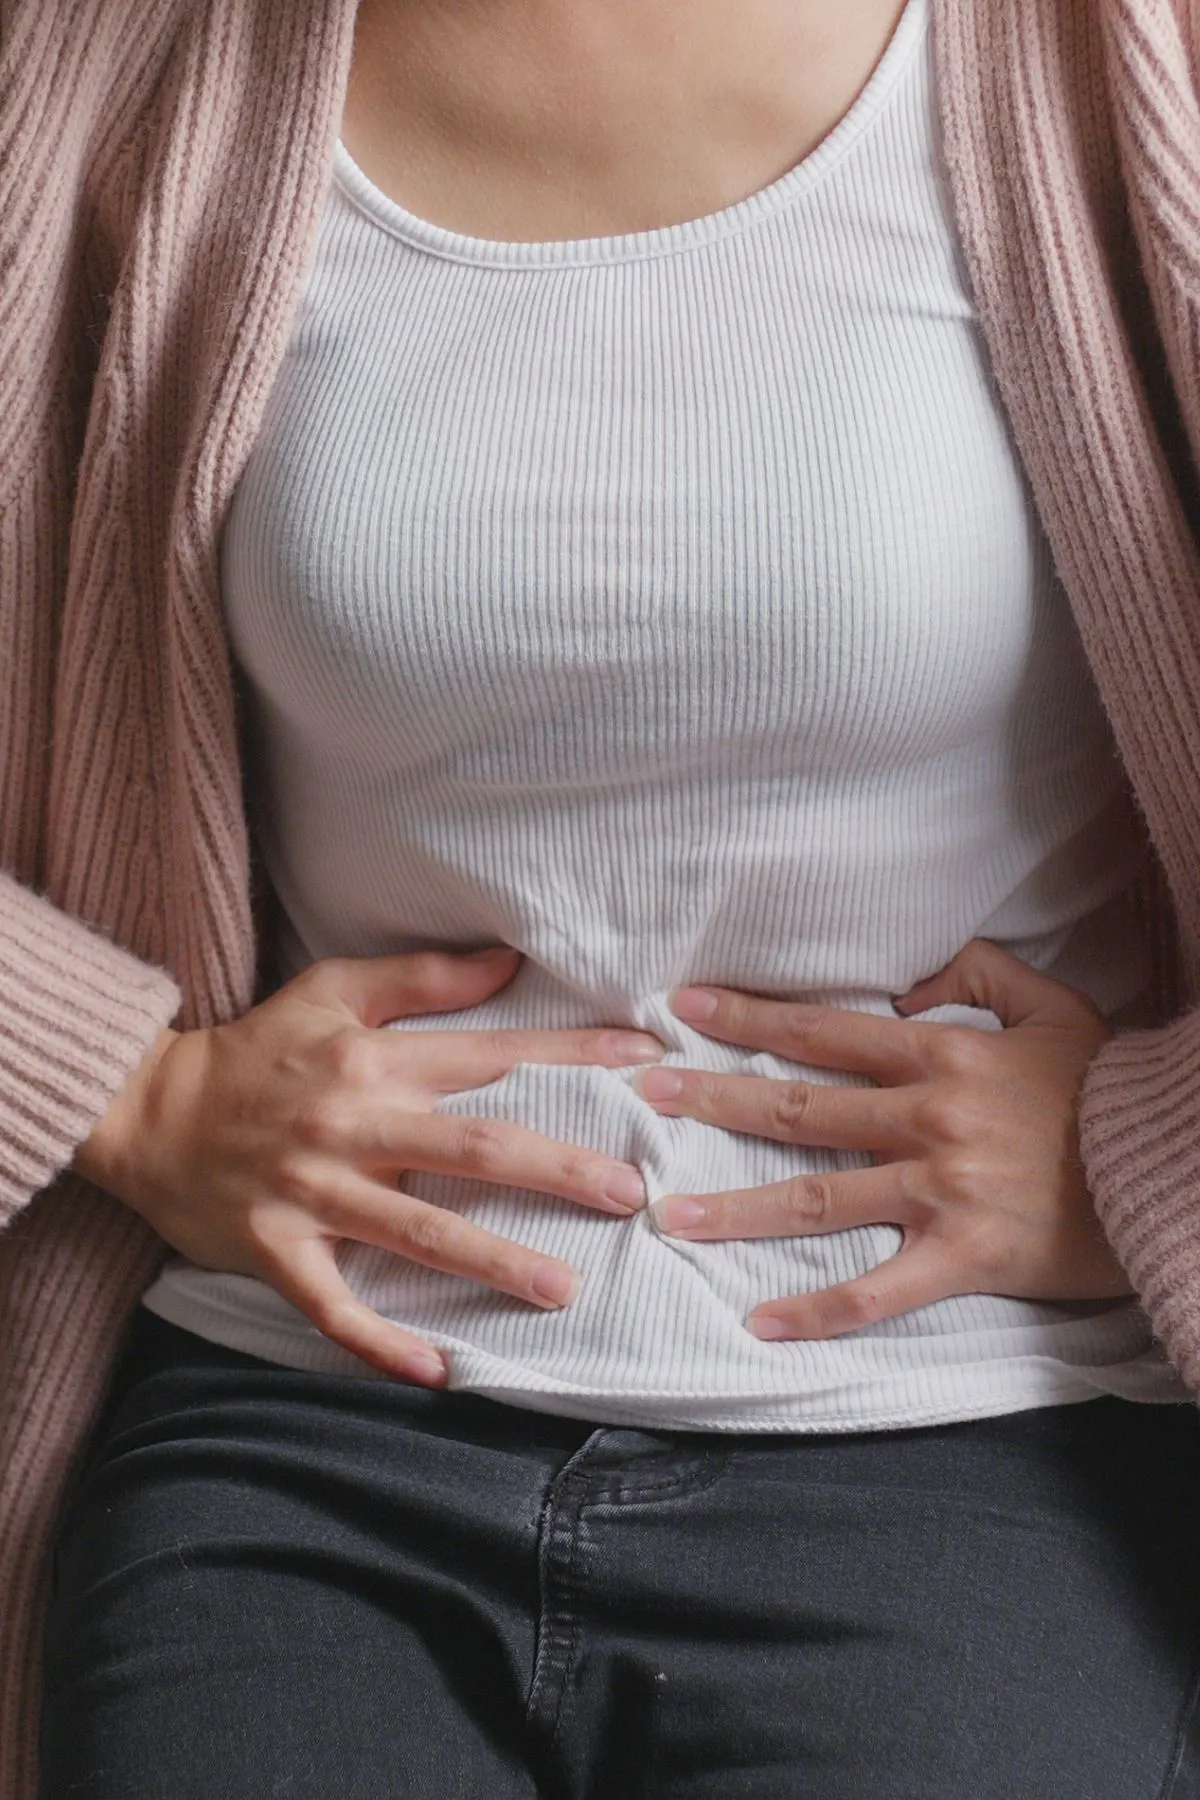 Woman hunches over and presses her hands to her stomach while experiencing abdominal pain.